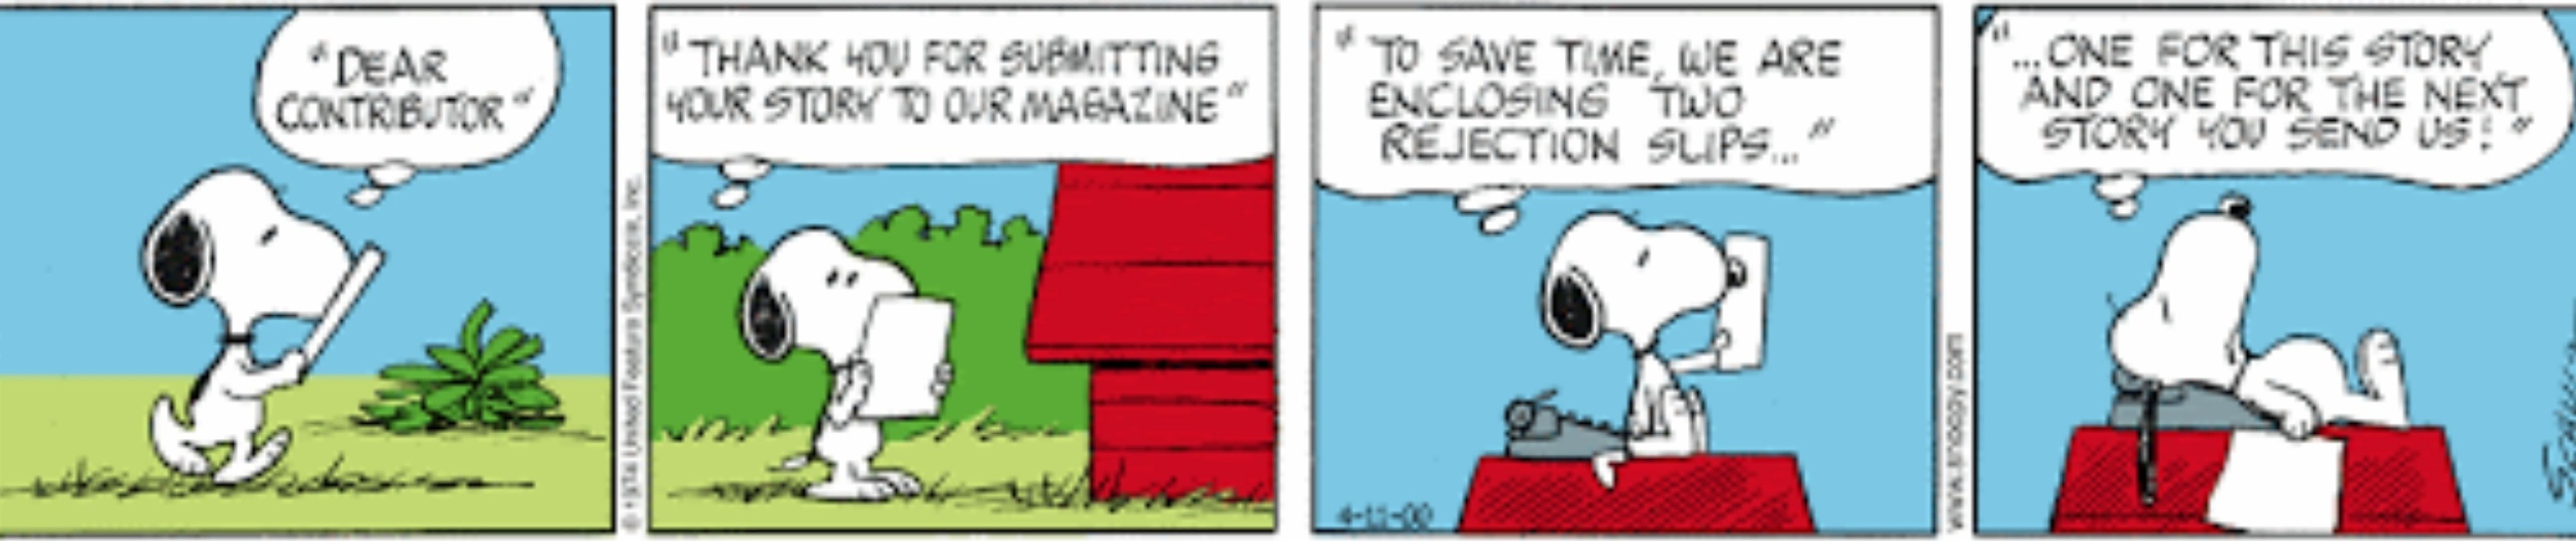 Snoopy getting a rejection letter in Peanuts.